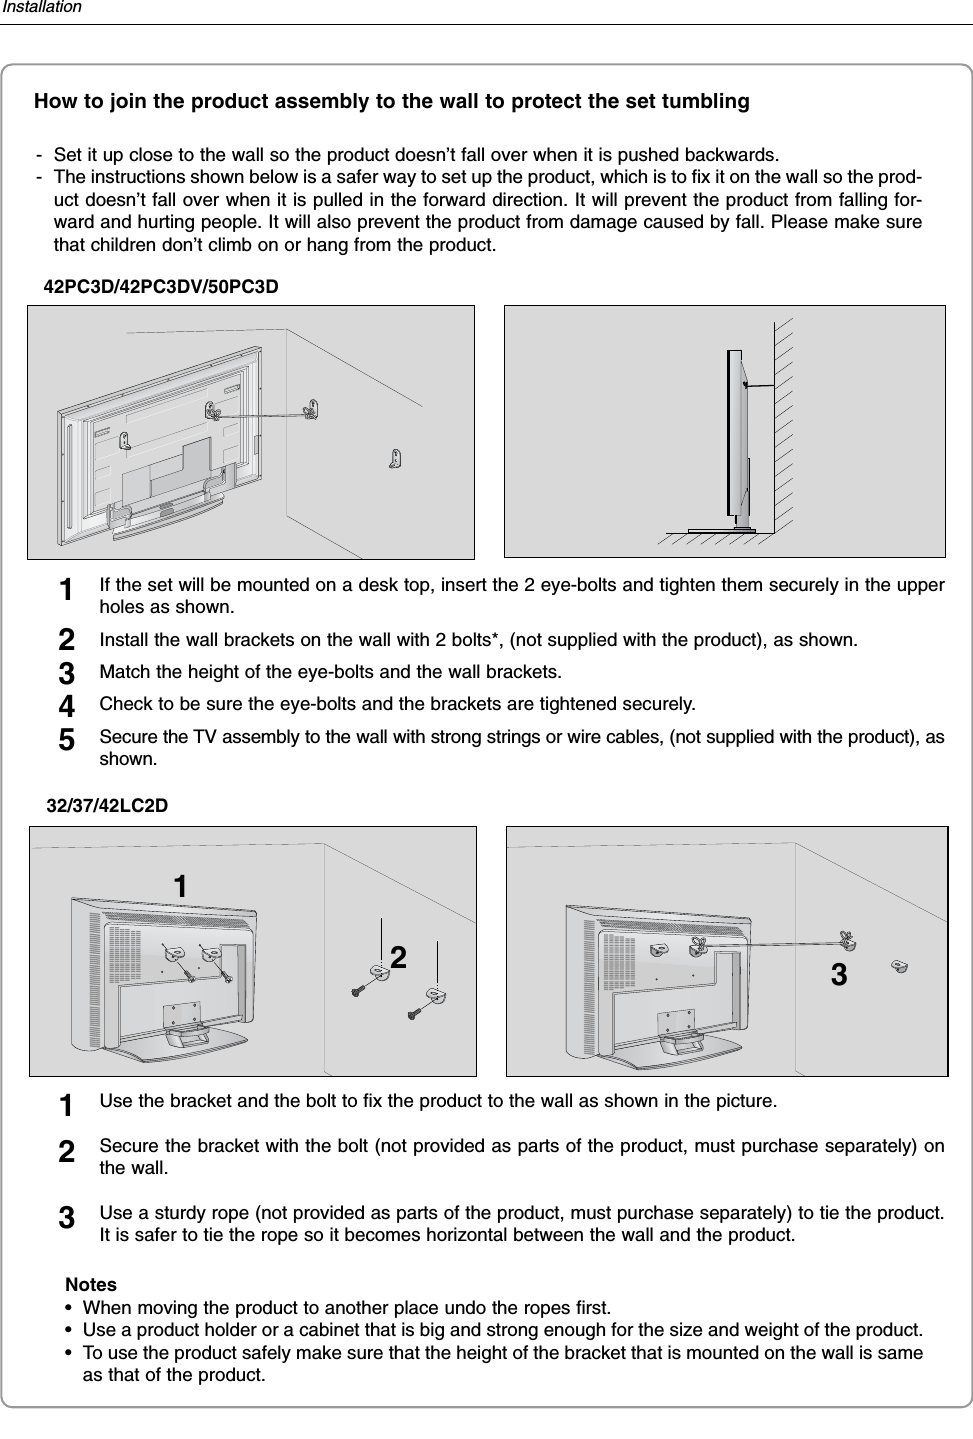 InstallationHow to join the product assembly to the wall to protect the set tumbling- Set it up close to the wall so the product doesn’t fall over when it is pushed backwards. - The instructions shown below is a safer way to set up the product, which is to fix it on the wall so the prod-uct doesn’t fall over when it is pulled in the forward direction. It will prevent the product from falling for-ward and hurting people. It will also prevent the product from damage caused by fall. Please make surethat children don’t climb on or hang from the product. 42PC3D/42PC3DV/50PC3DNotes• When moving the product to another place undo the ropes first.• Use a product holder or a cabinet that is big and strong enough for the size and weight of the product. • To use the product safely make sure that the height of the bracket that is mounted on the wall is sameas that of the product. 213Use the bracket and the bolt to fix the product to the wall as shown in the picture. Secure the bracket with the bolt (not provided as parts of the product, must purchase separately) onthe wall.Use a sturdy rope (not provided as parts of the product, must purchase separately) to tie the product.It is safer to tie the rope so it becomes horizontal between the wall and the product.12332/37/42LC2DIf the set will be mounted on a desk top, insert the 2 eye-bolts and tighten them securely in the upperholes as shown.Install the wall brackets on the wall with 2 bolts*, (not supplied with the product), as shown.Match the height of the eye-bolts and the wall brackets.Check to be sure the eye-bolts and the brackets are tightened securely.Secure the TV assembly to the wall with strong strings or wire cables, (not supplied with the product), asshown.12345